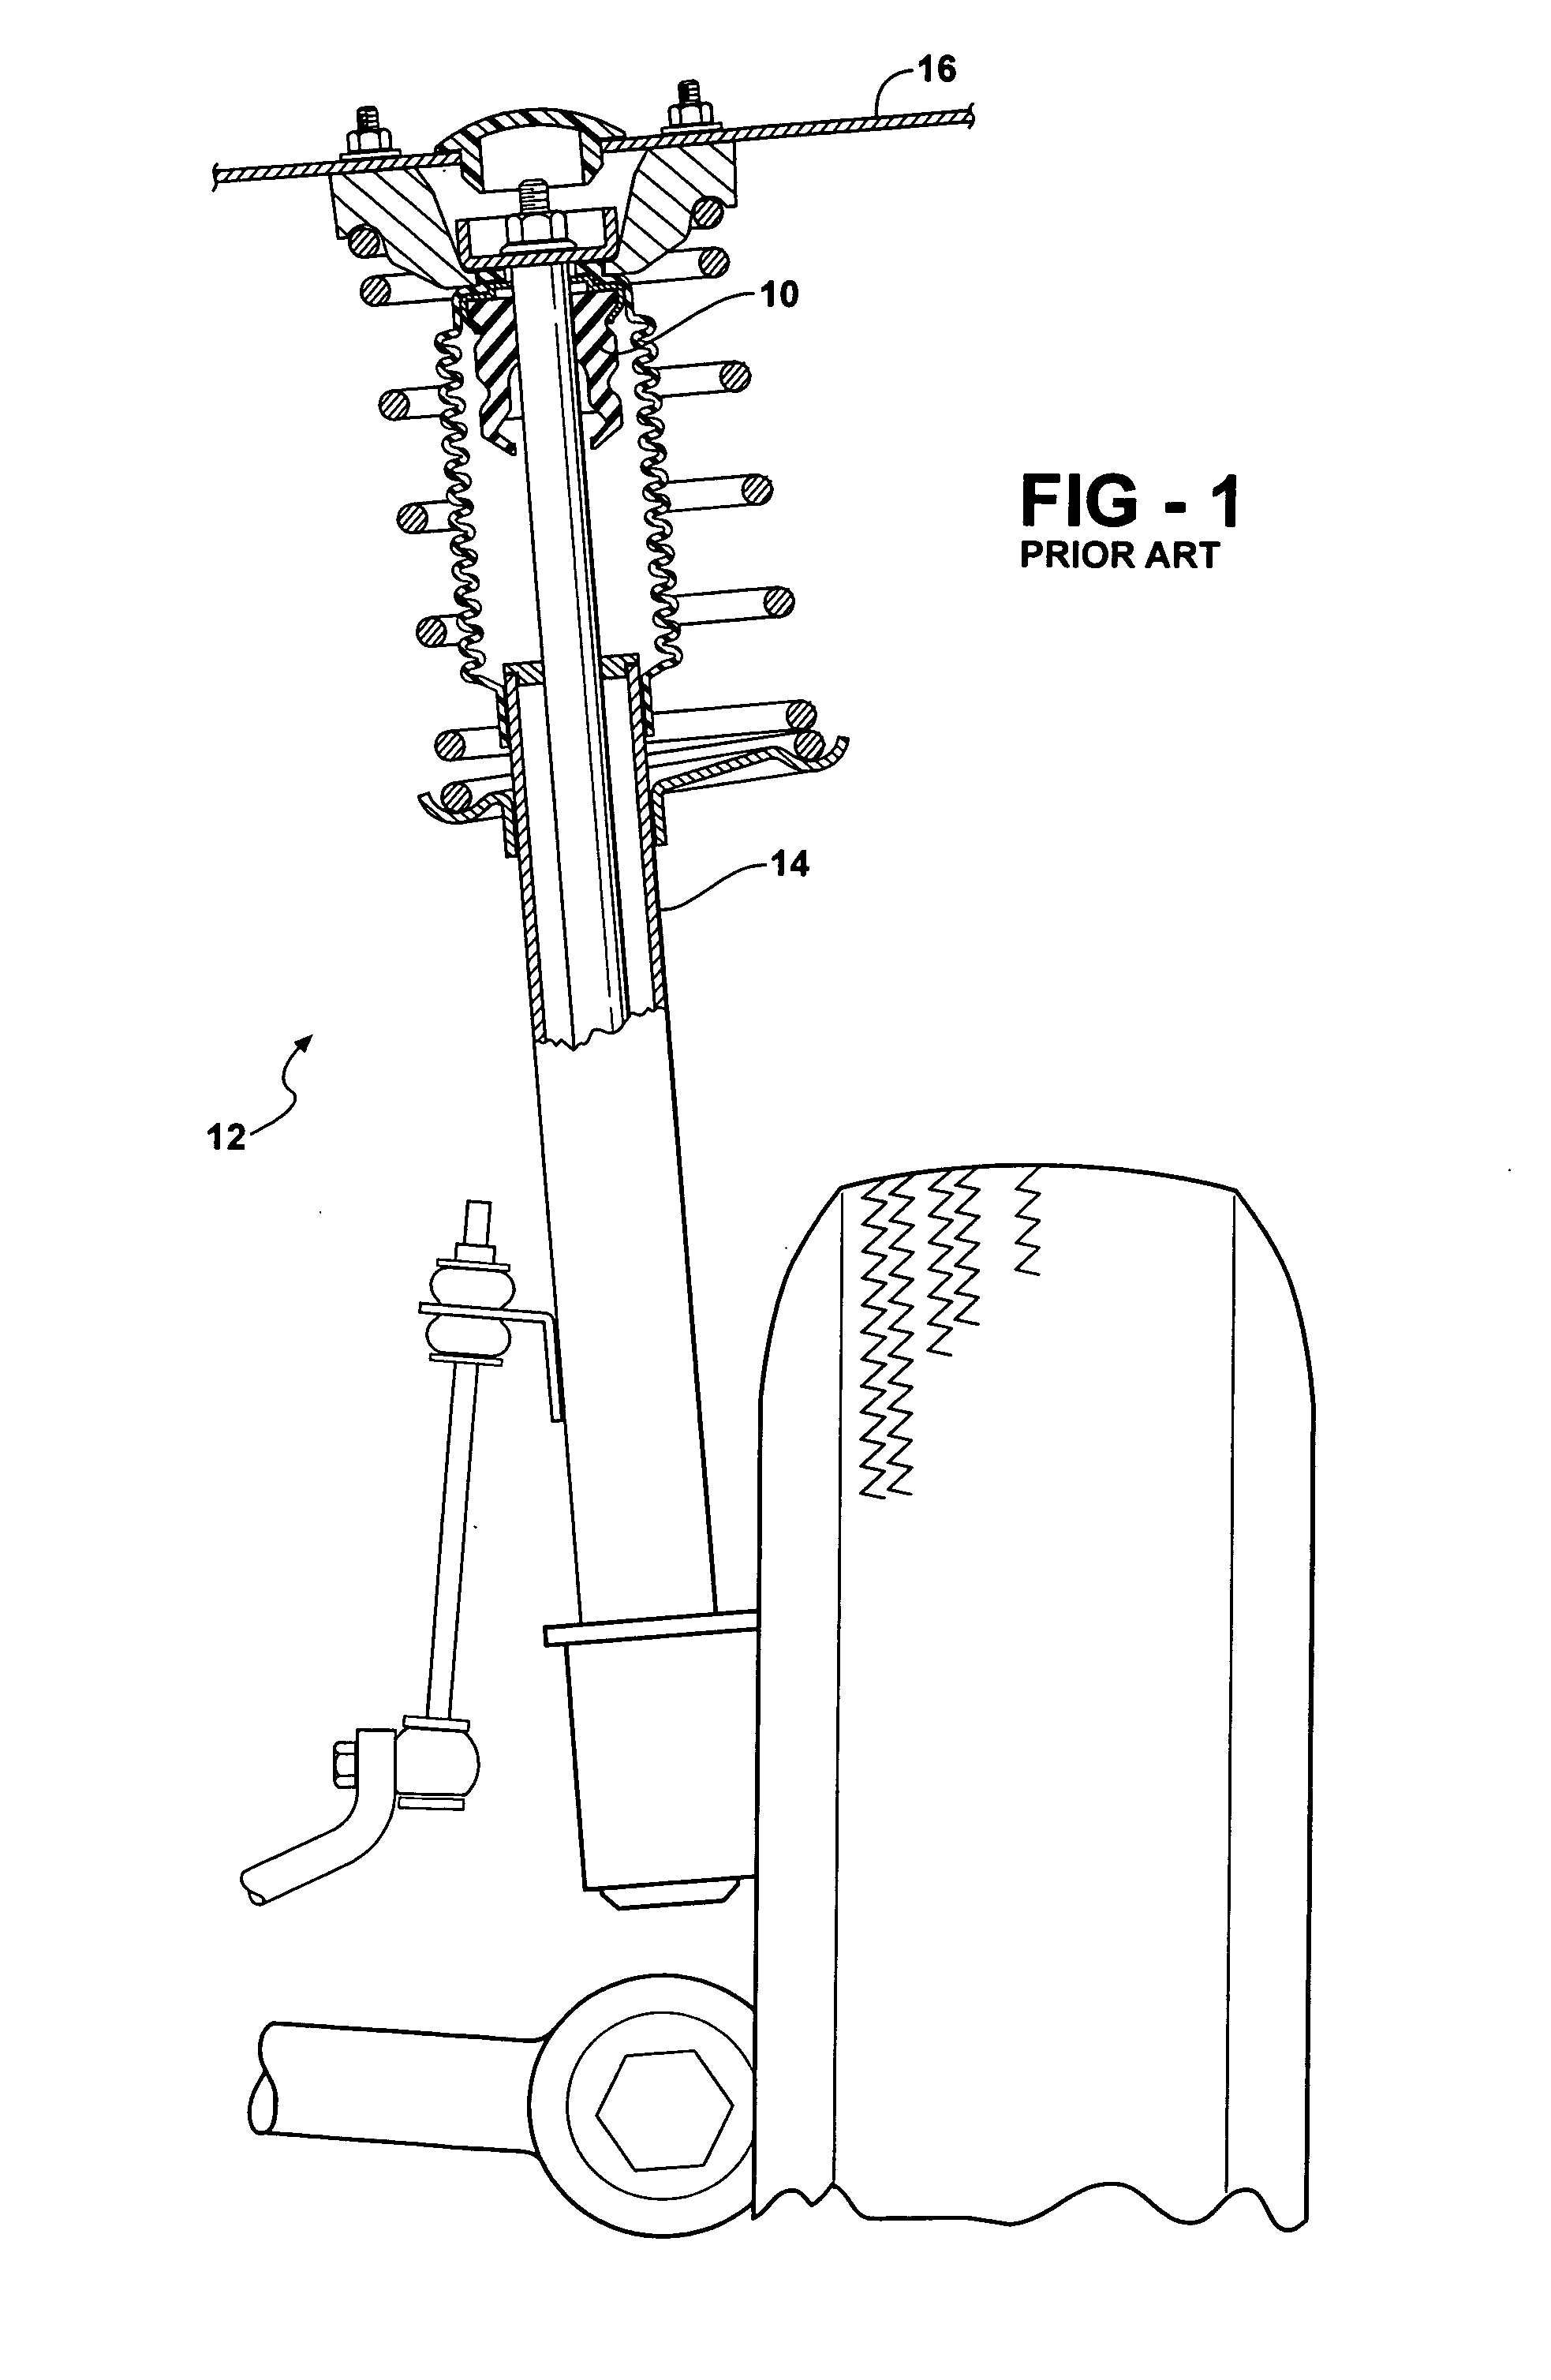 Jounce assembly for a suspension system